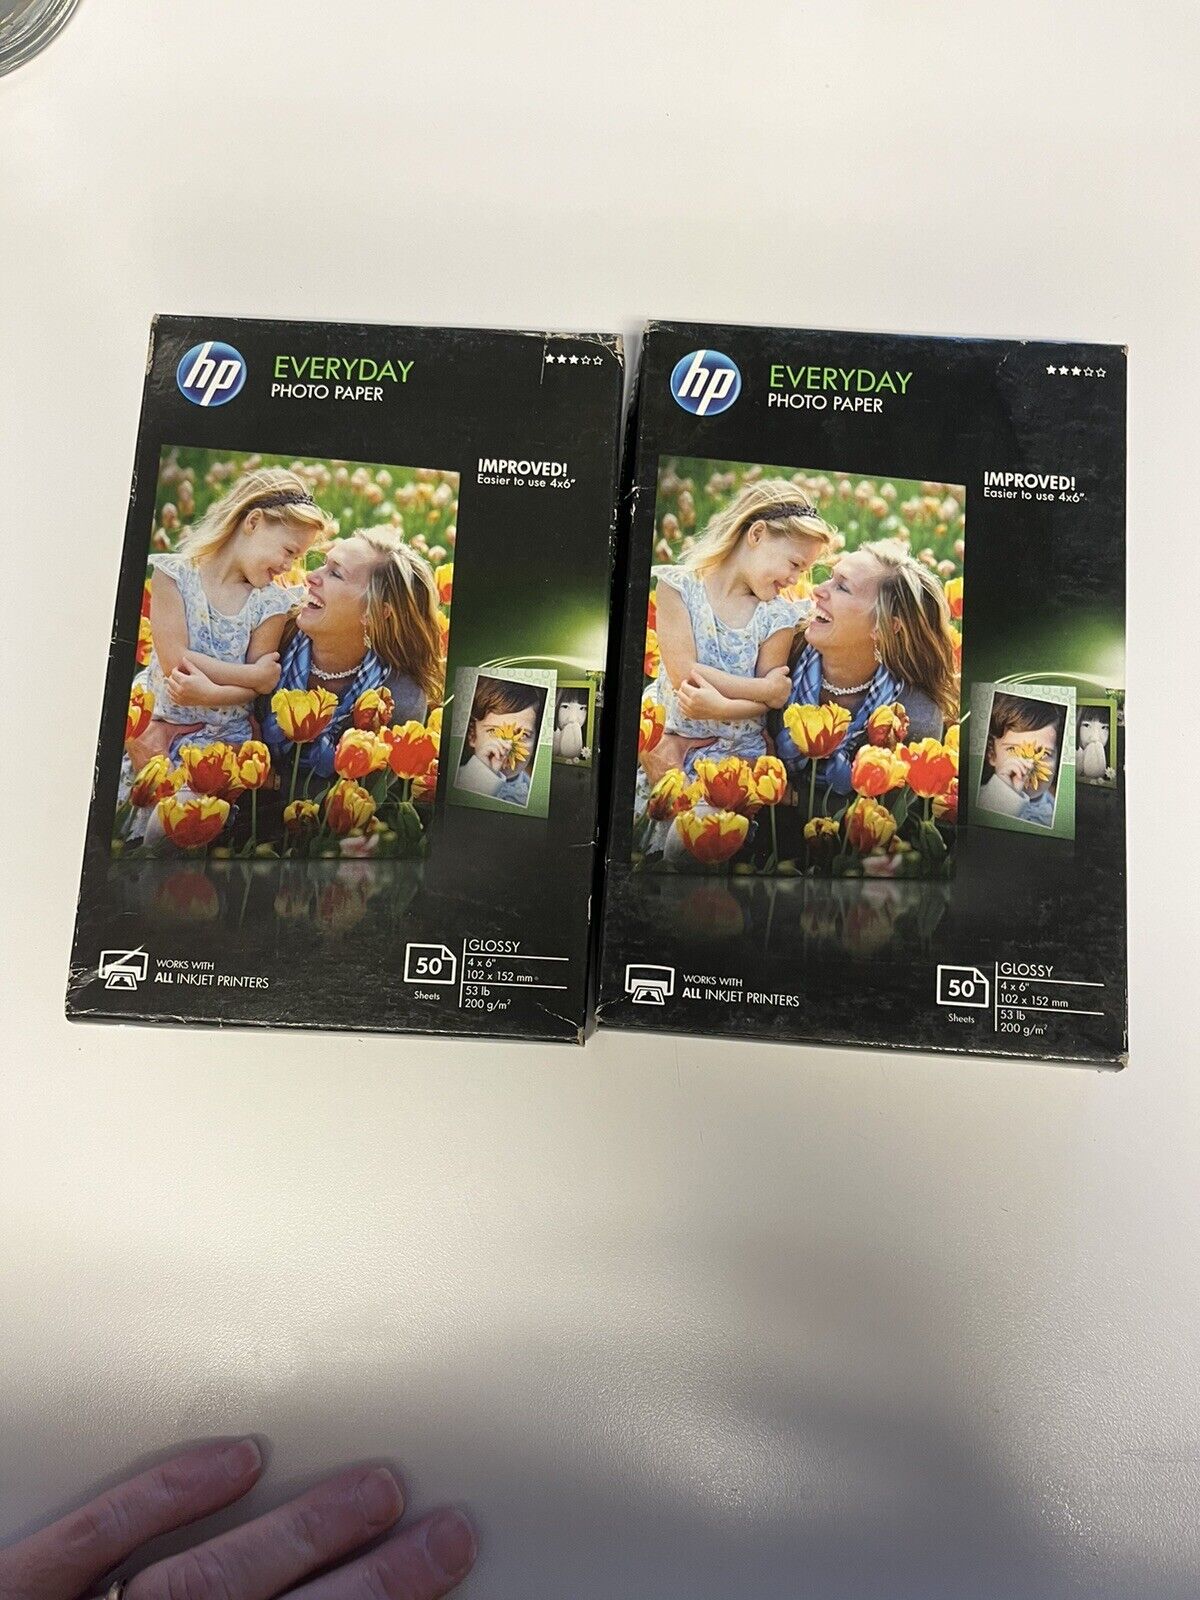 Brand New 2 Packs Of hp everyday photo paper Works With All Inkjet Printers.